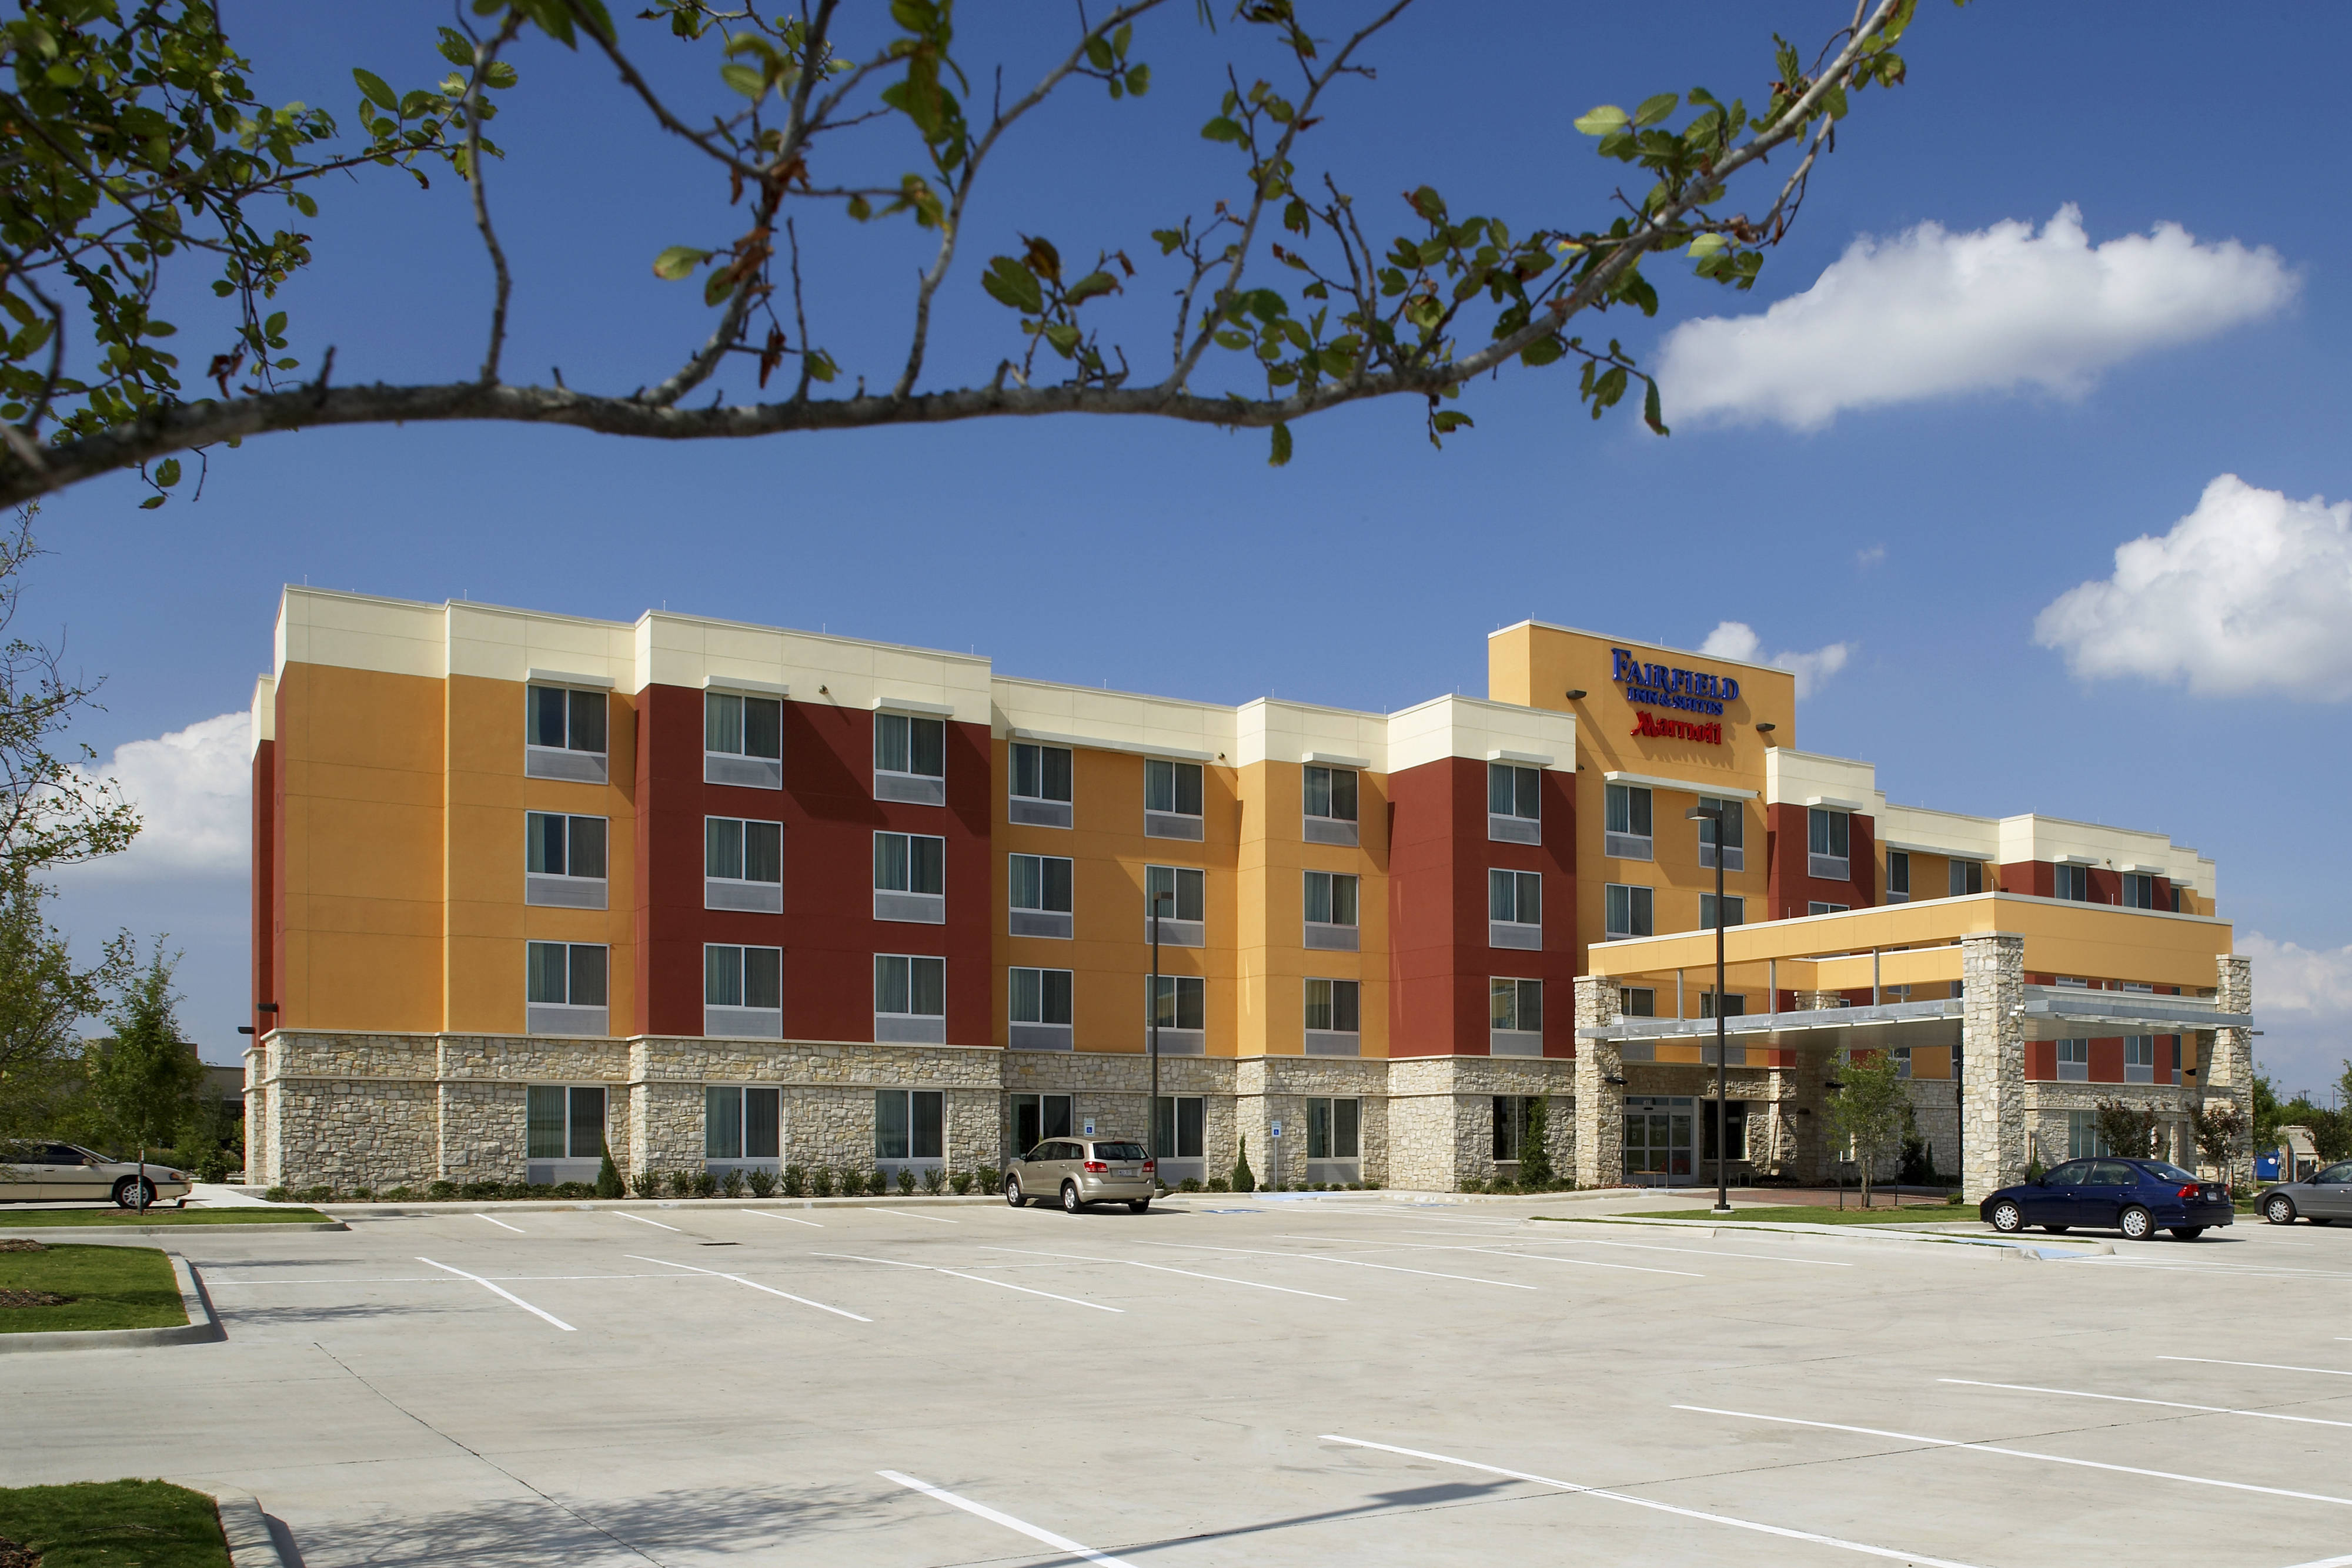 Photo of Fairfield Inn & Suites by Marriott Dallas Plano/The Colony, The Colony, TX